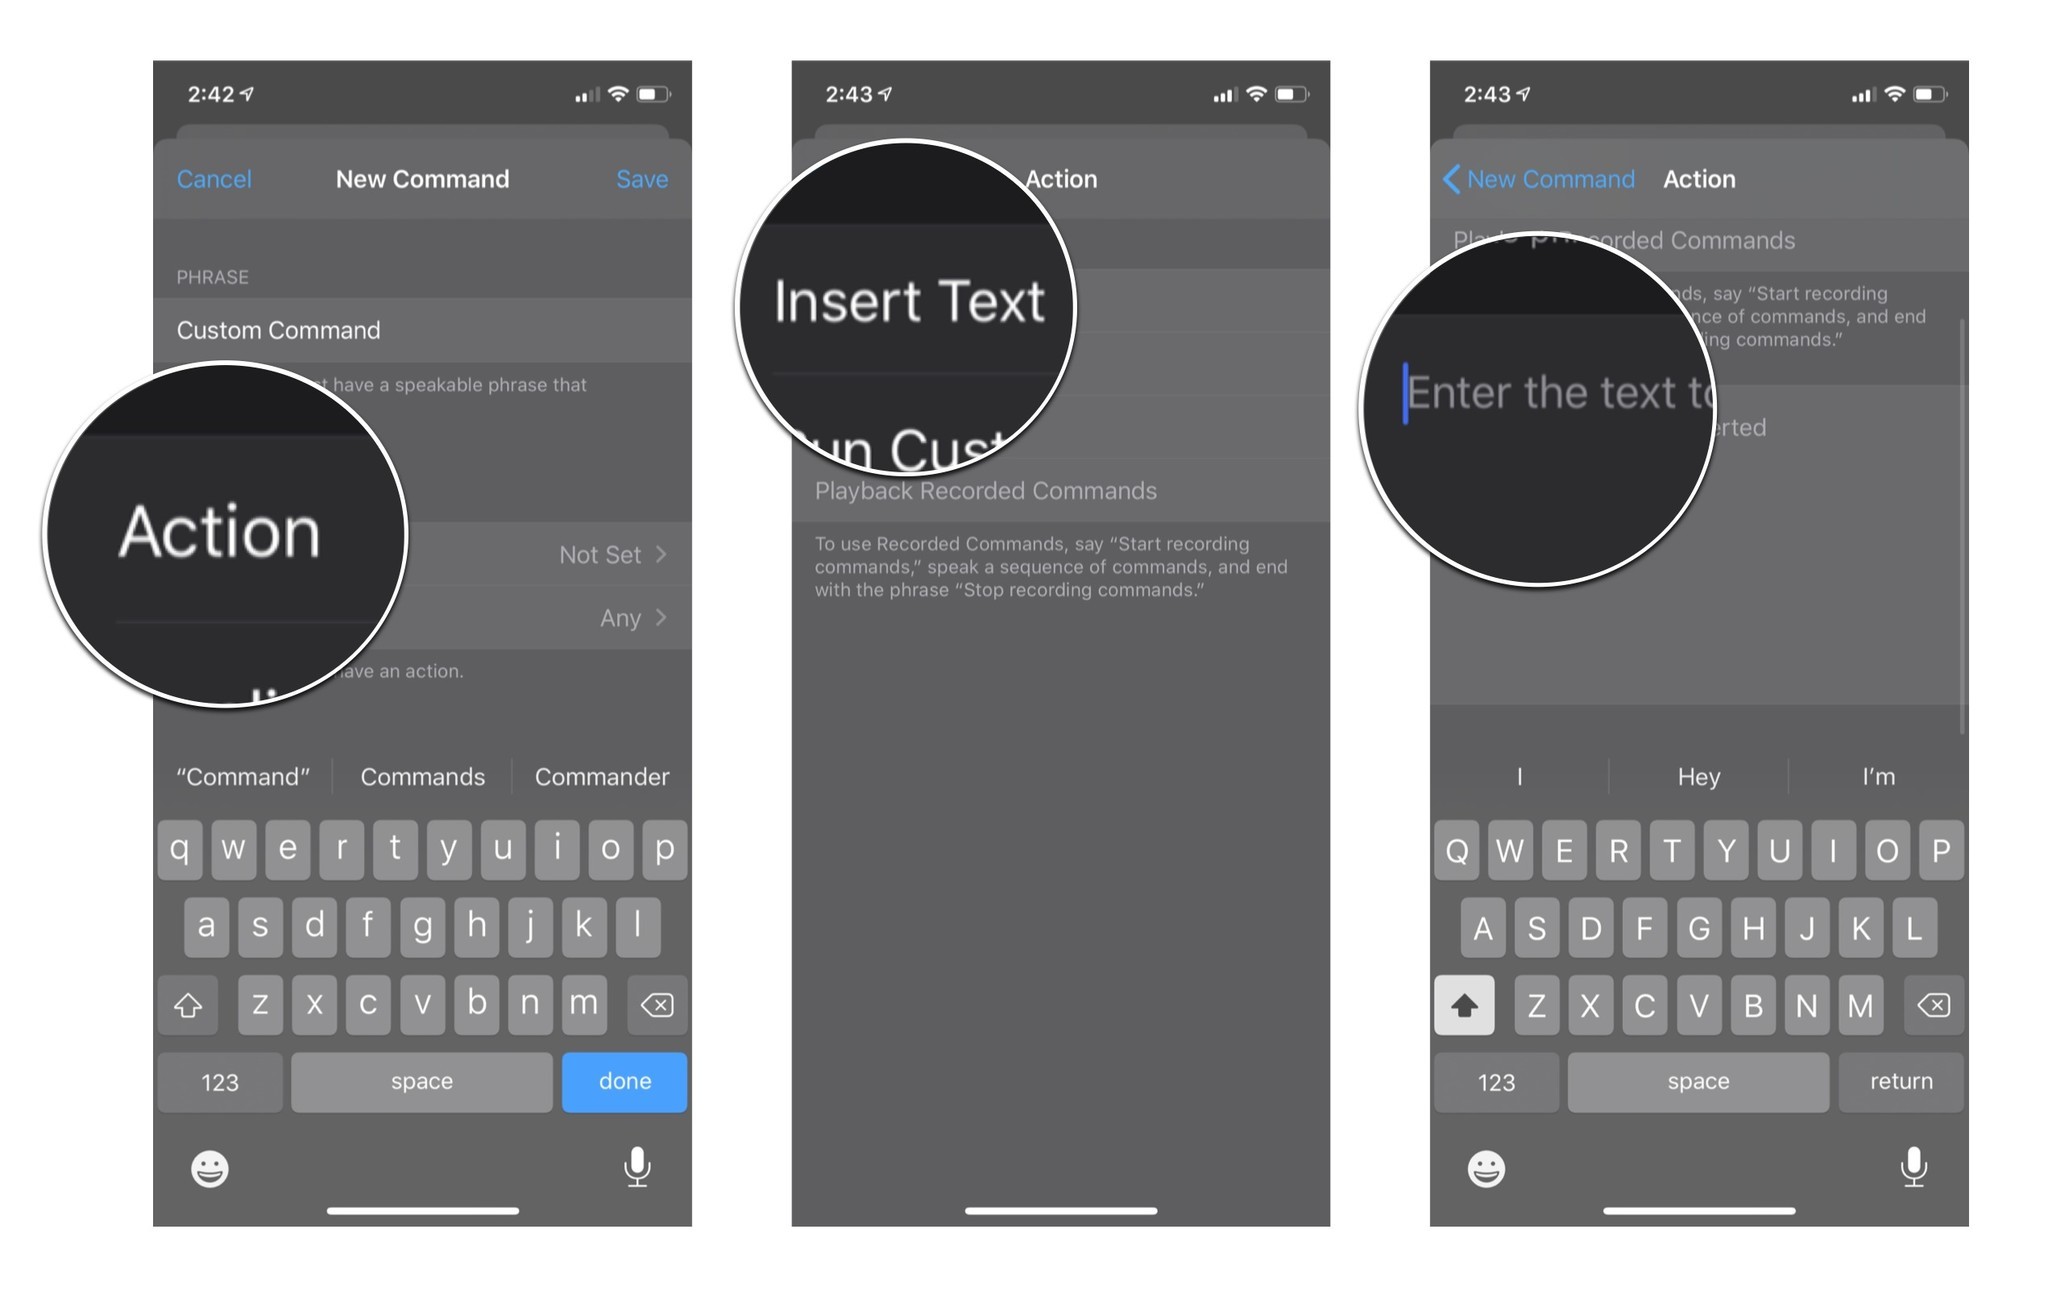 Voice control custom command edit screen: Tap action, tap insert text, and then enter the desired text.